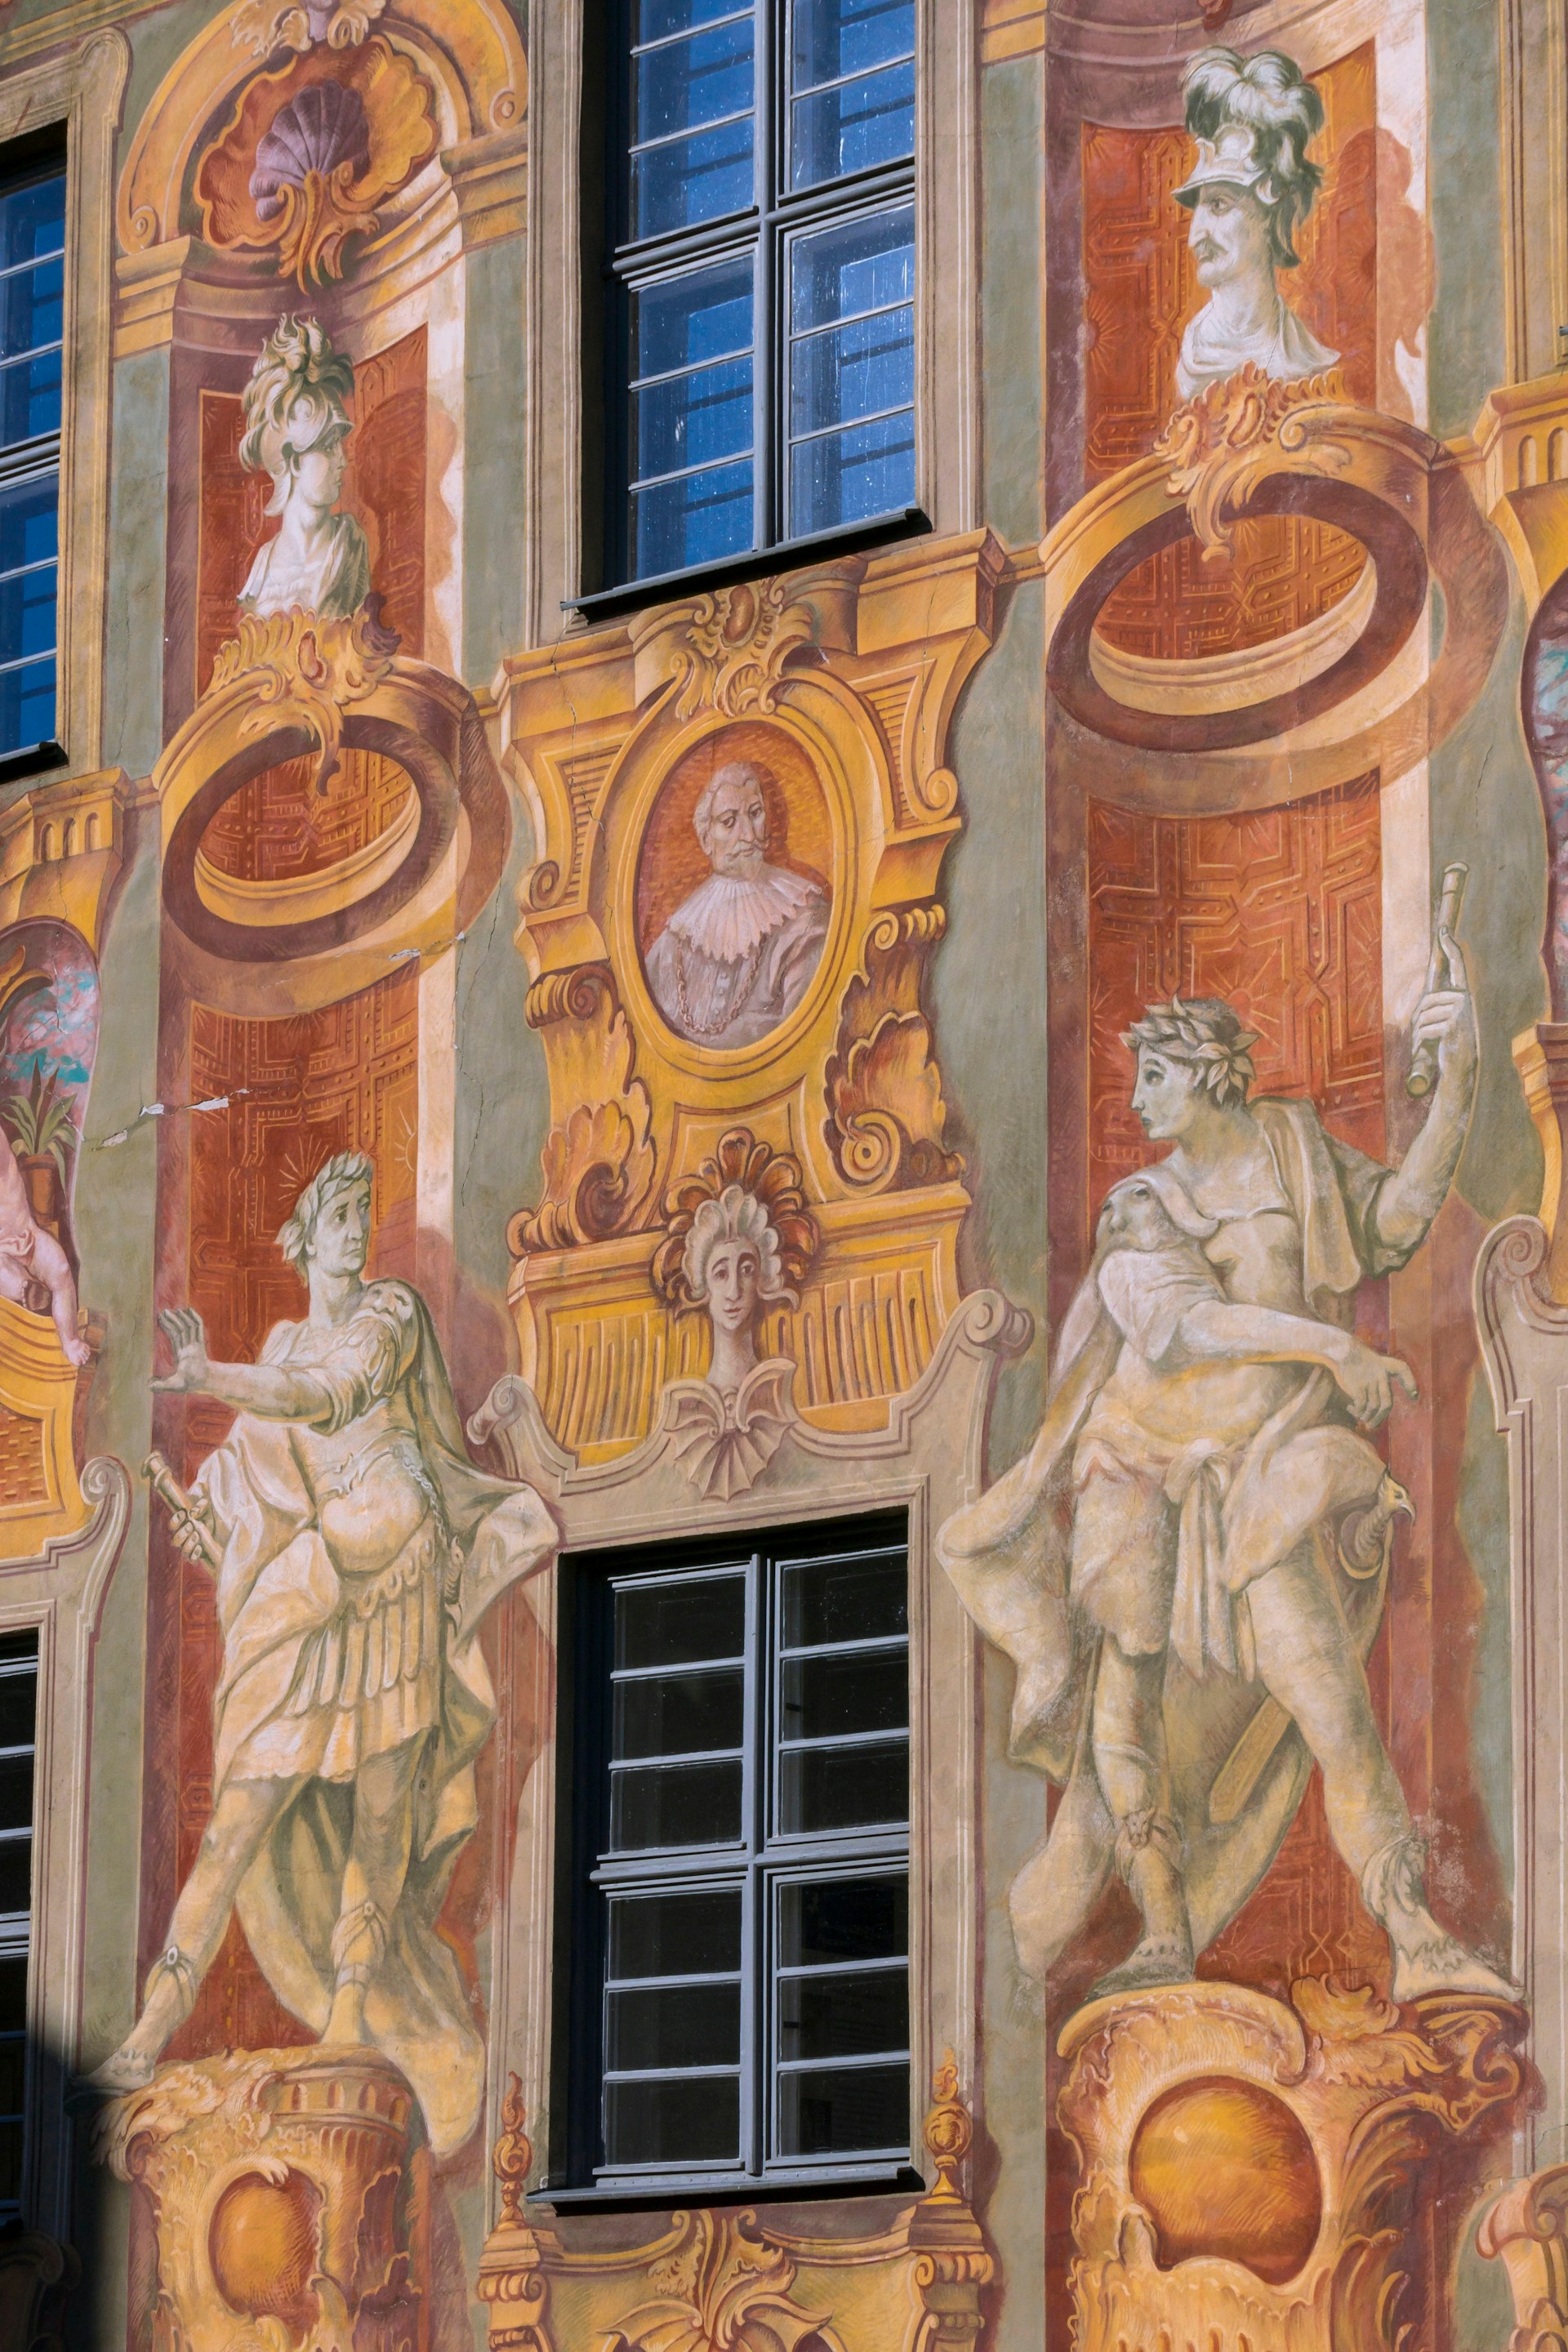 Murals on the outside of the Altes Rathaus (city hall) in Bamberg, Germany